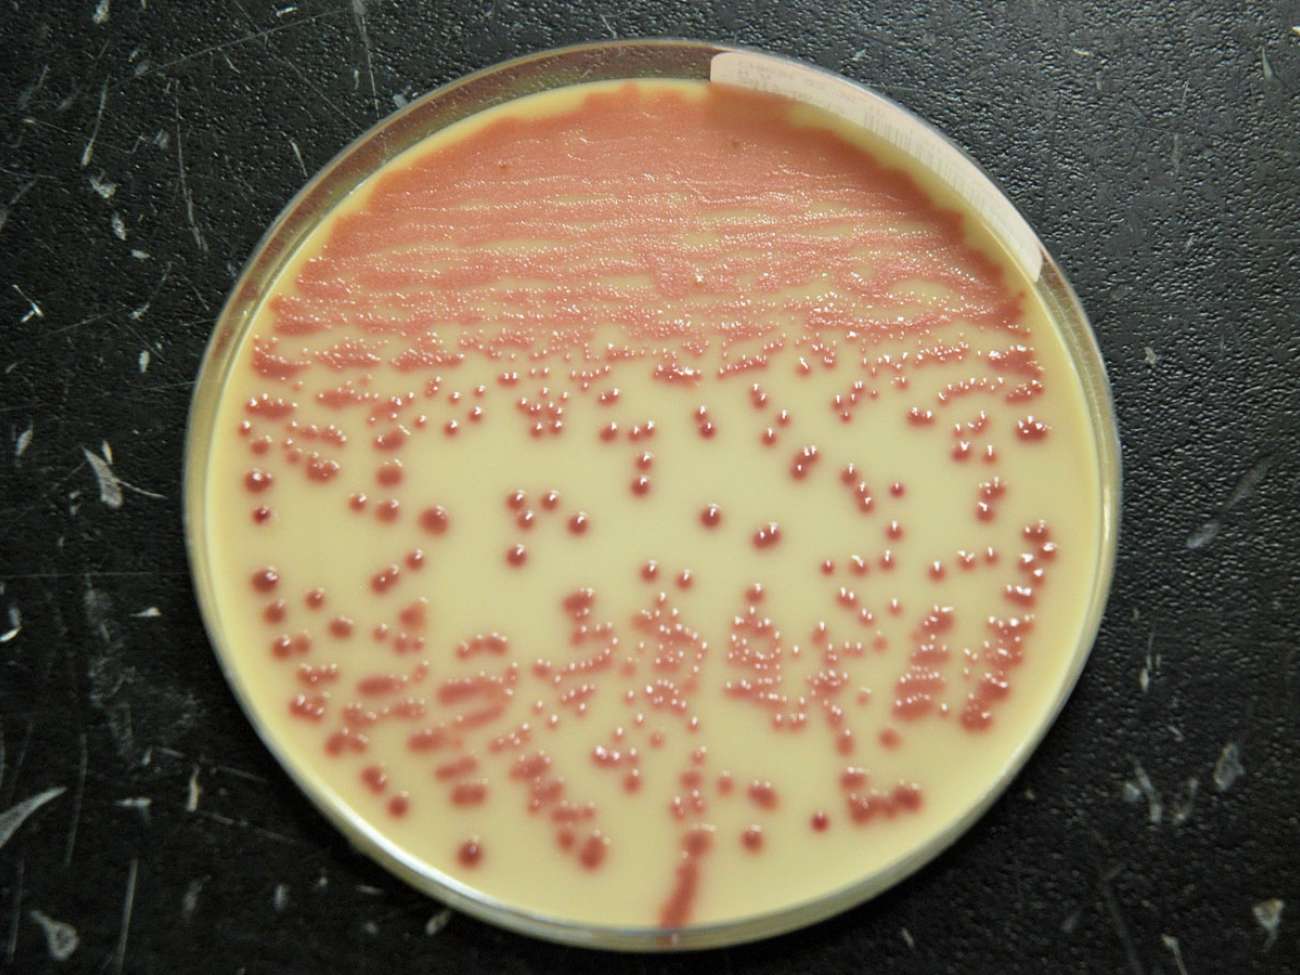 A sample is "streaked" onto a petri dish, and incubated for 24 to 48 hours. Automated streaking can streak more of a petri dish with greater consistency, helping lab staff to grow pathogens more effectively.